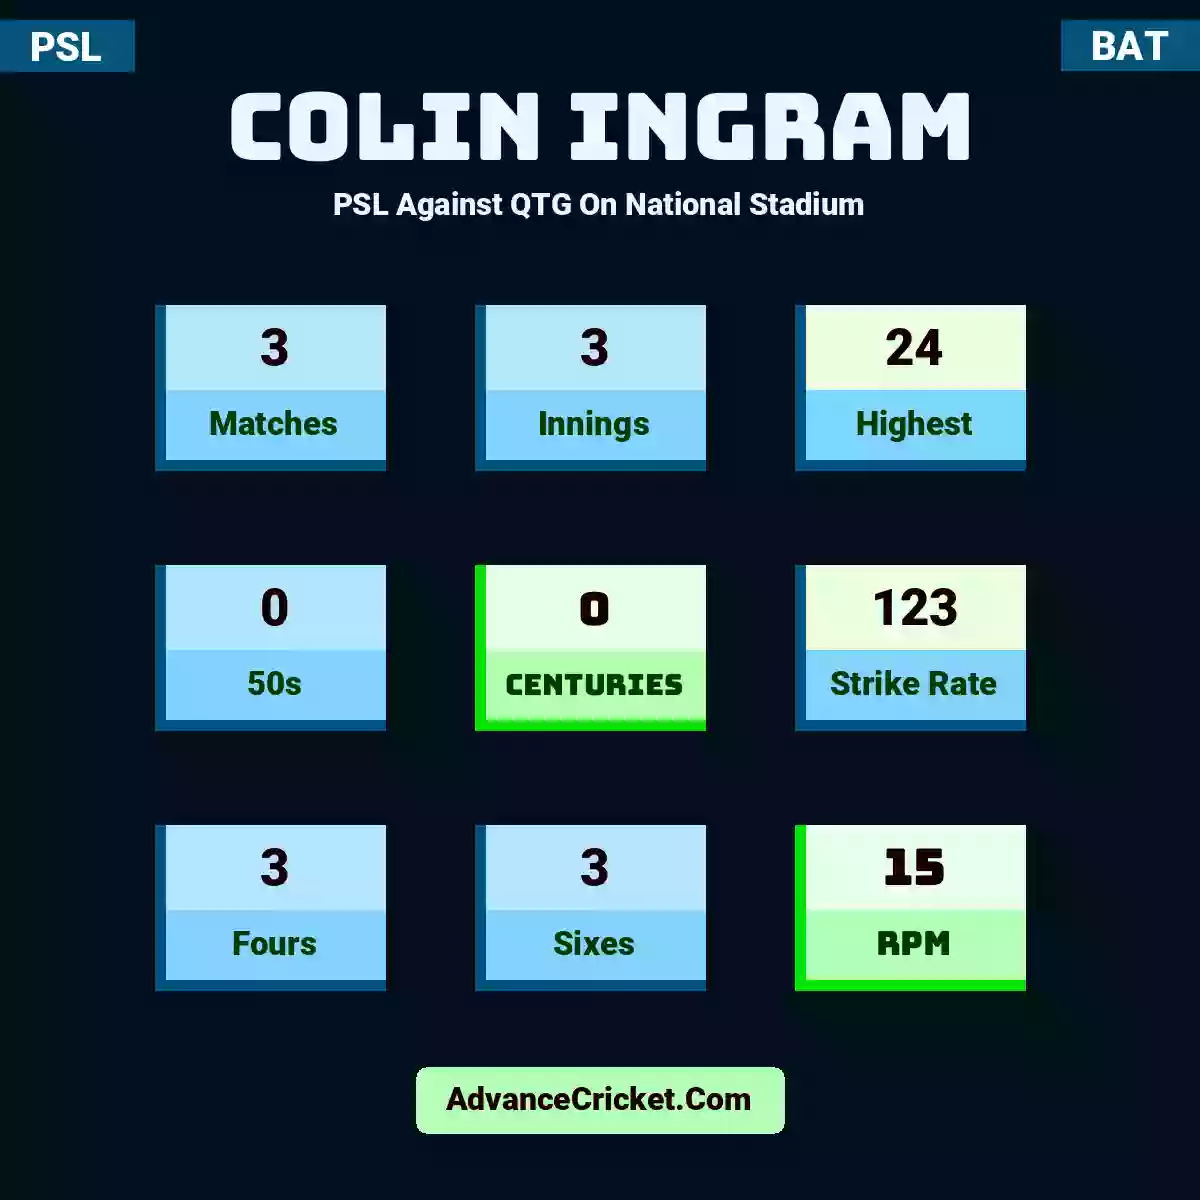 Colin Ingram PSL  Against QTG On National Stadium, Colin Ingram played 3 matches, scored 24 runs as highest, 0 half-centuries, and 0 centuries, with a strike rate of 123. C.Ingram hit 3 fours and 3 sixes, with an RPM of 15.